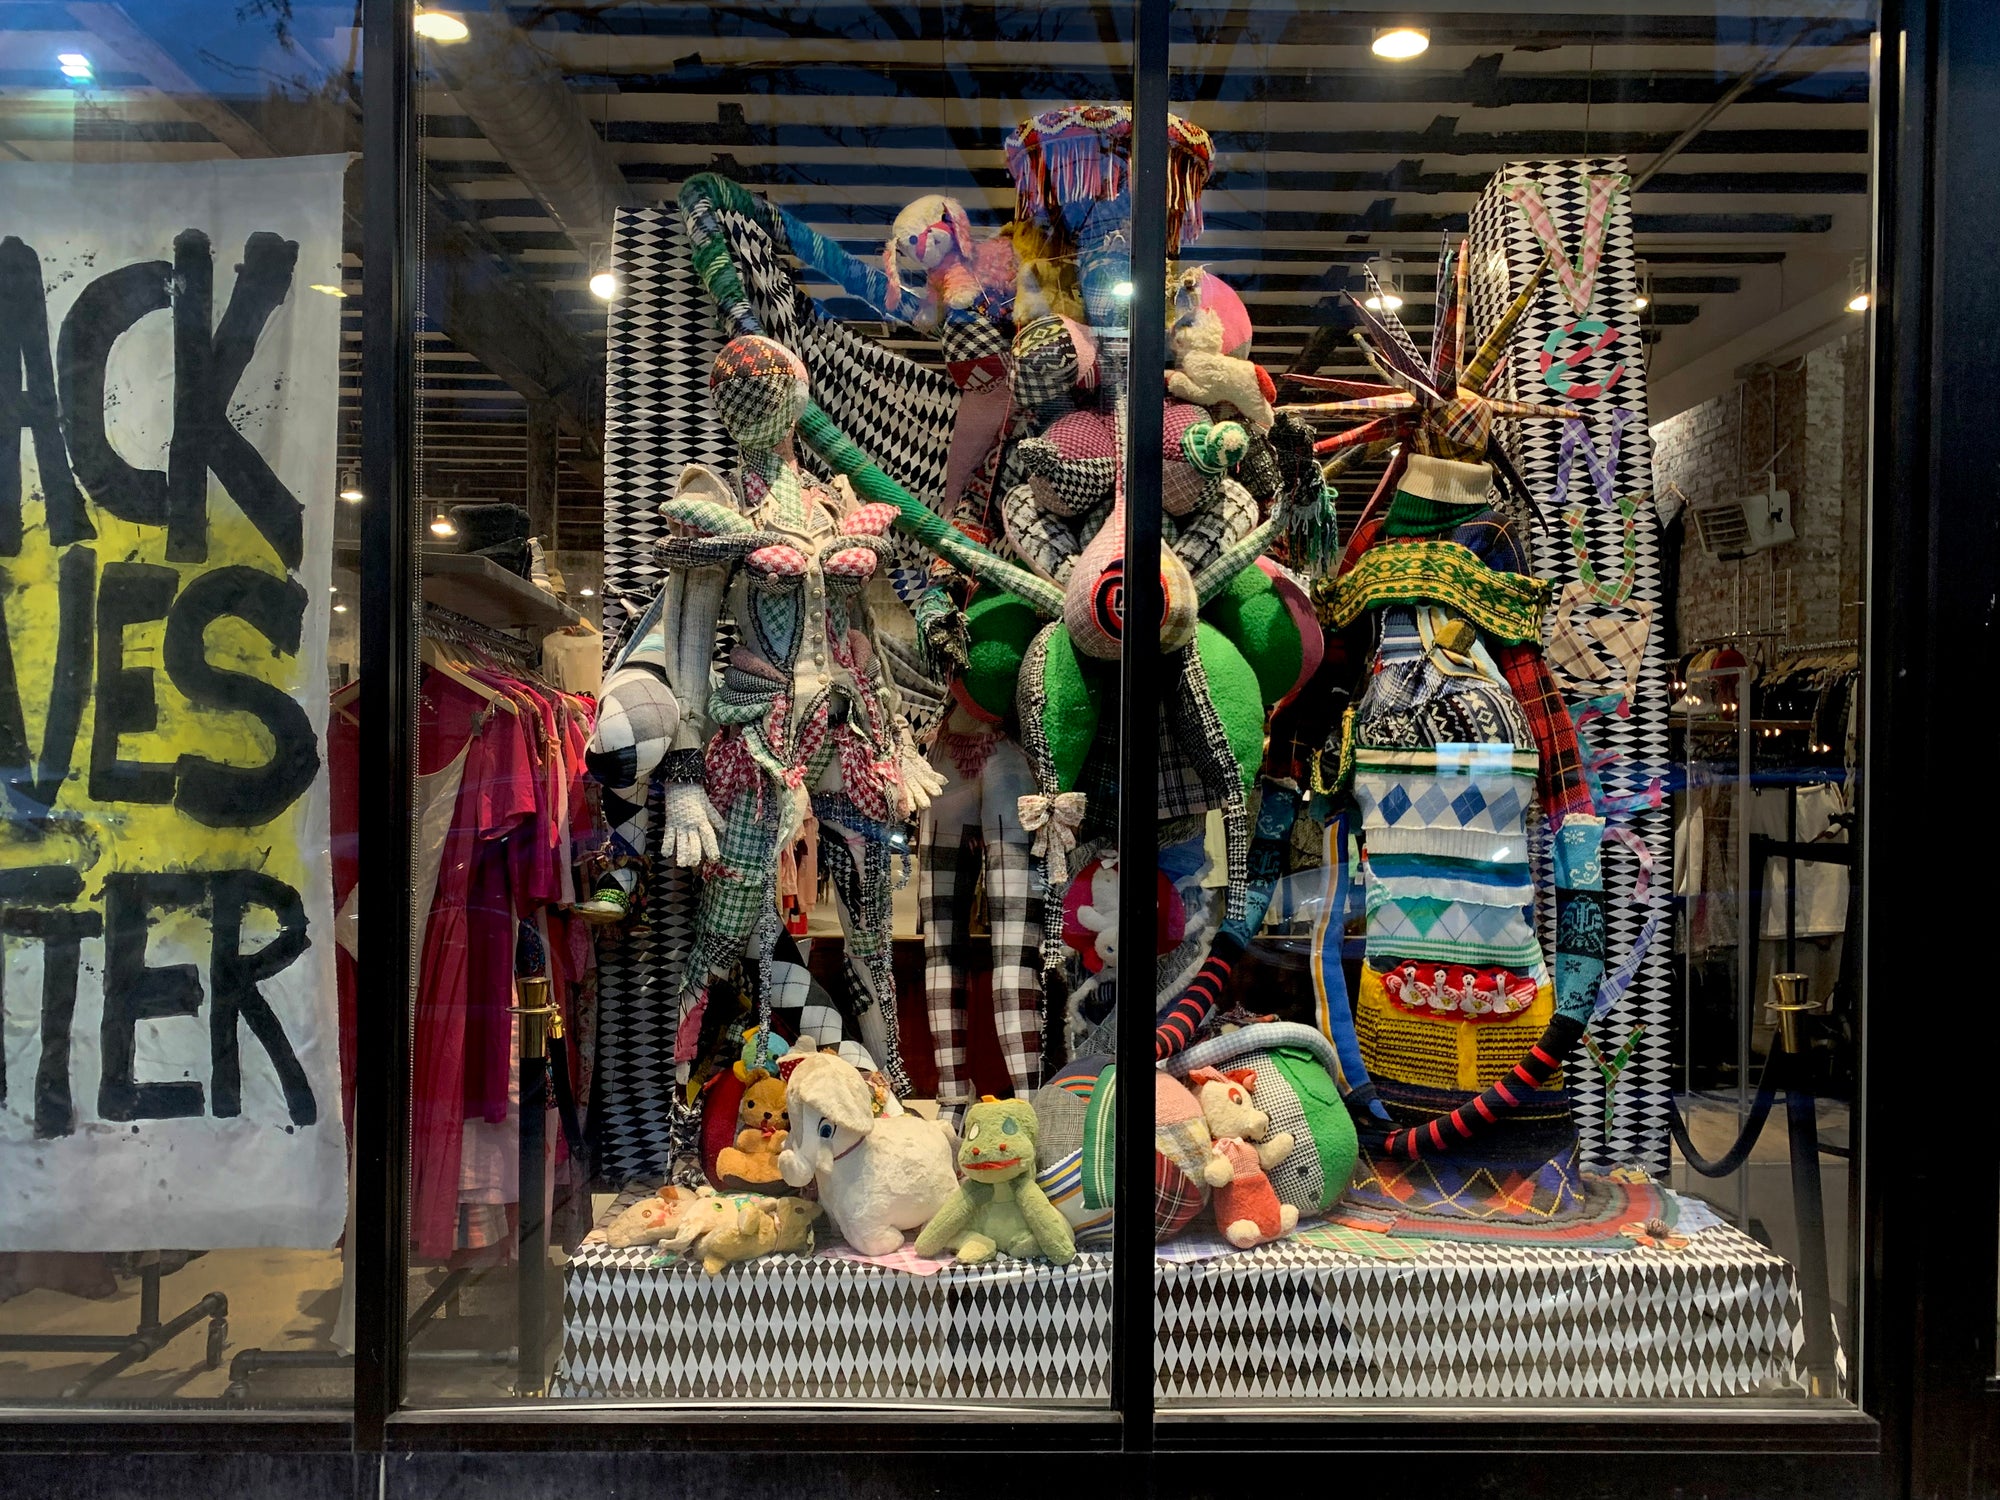 store window display showing crafty mannequins and vintage stuffed animals